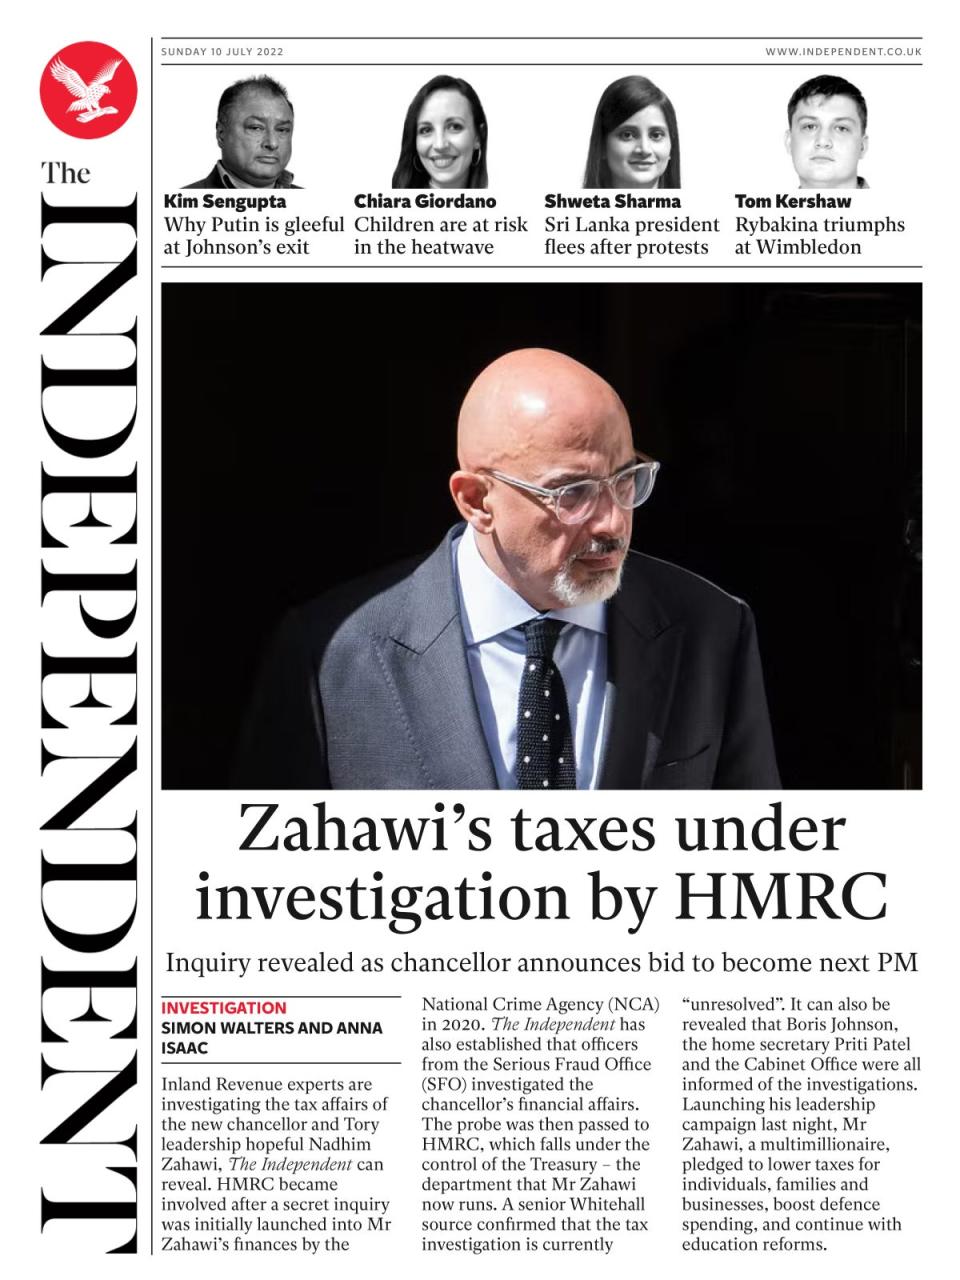 The investigation was sparked by The Independent’s revelation of an HMRC investigation into the MP’s tax affairs (The Independent)